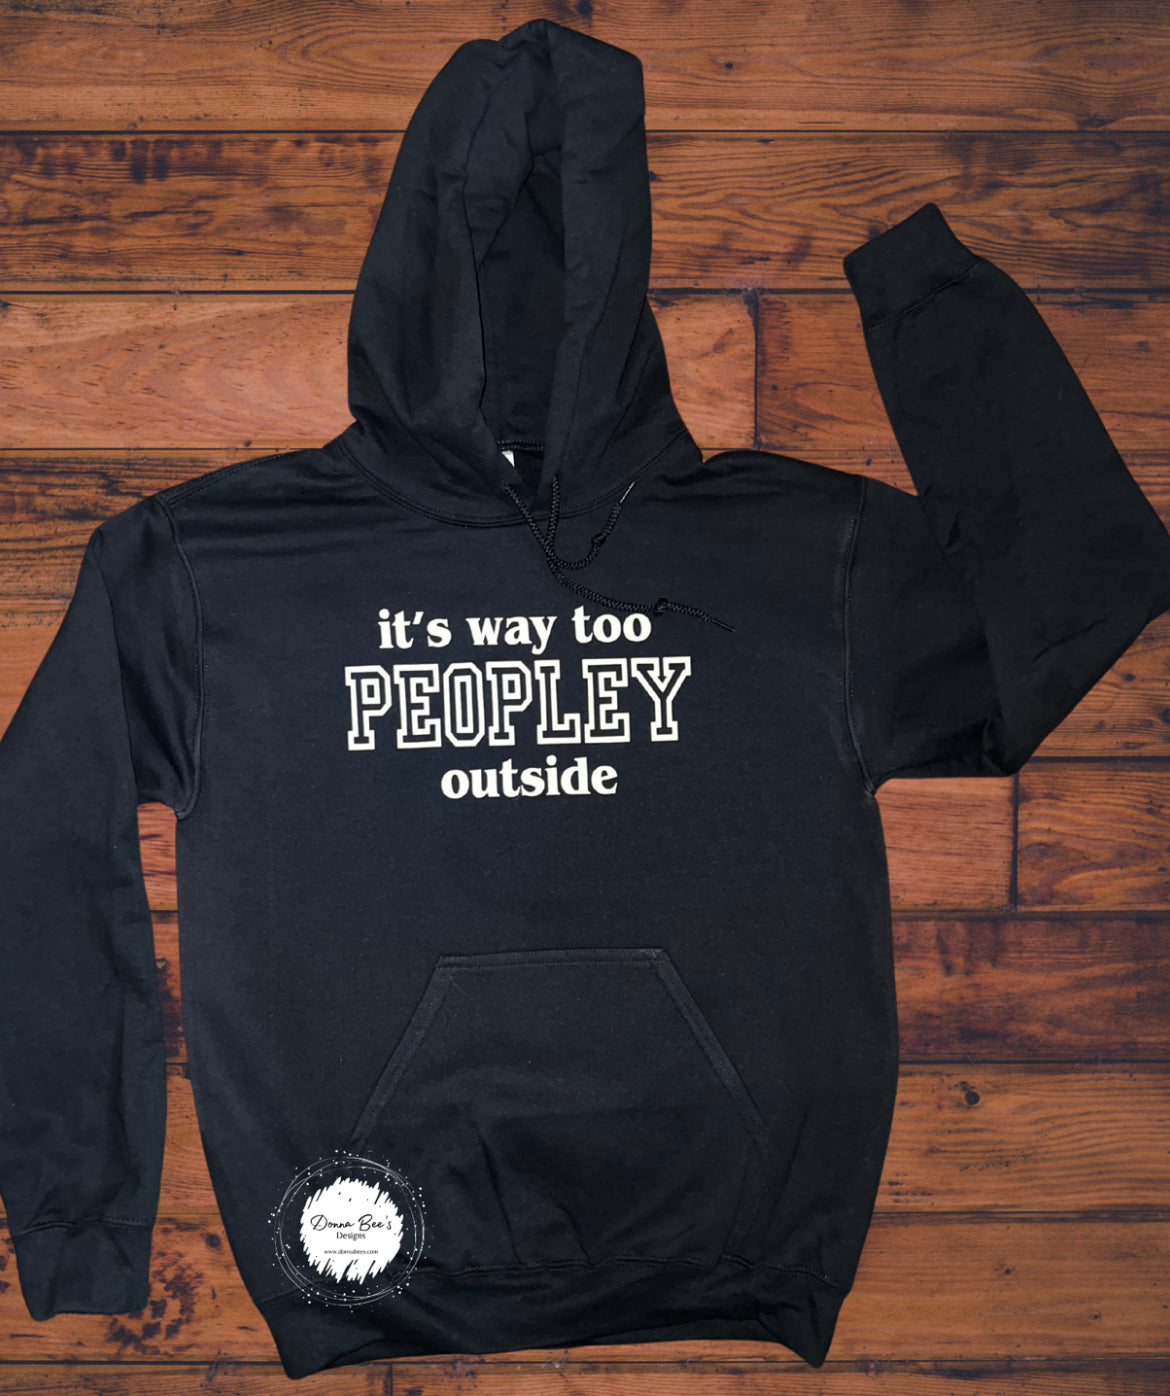 It’s way to peopley outside hoodie